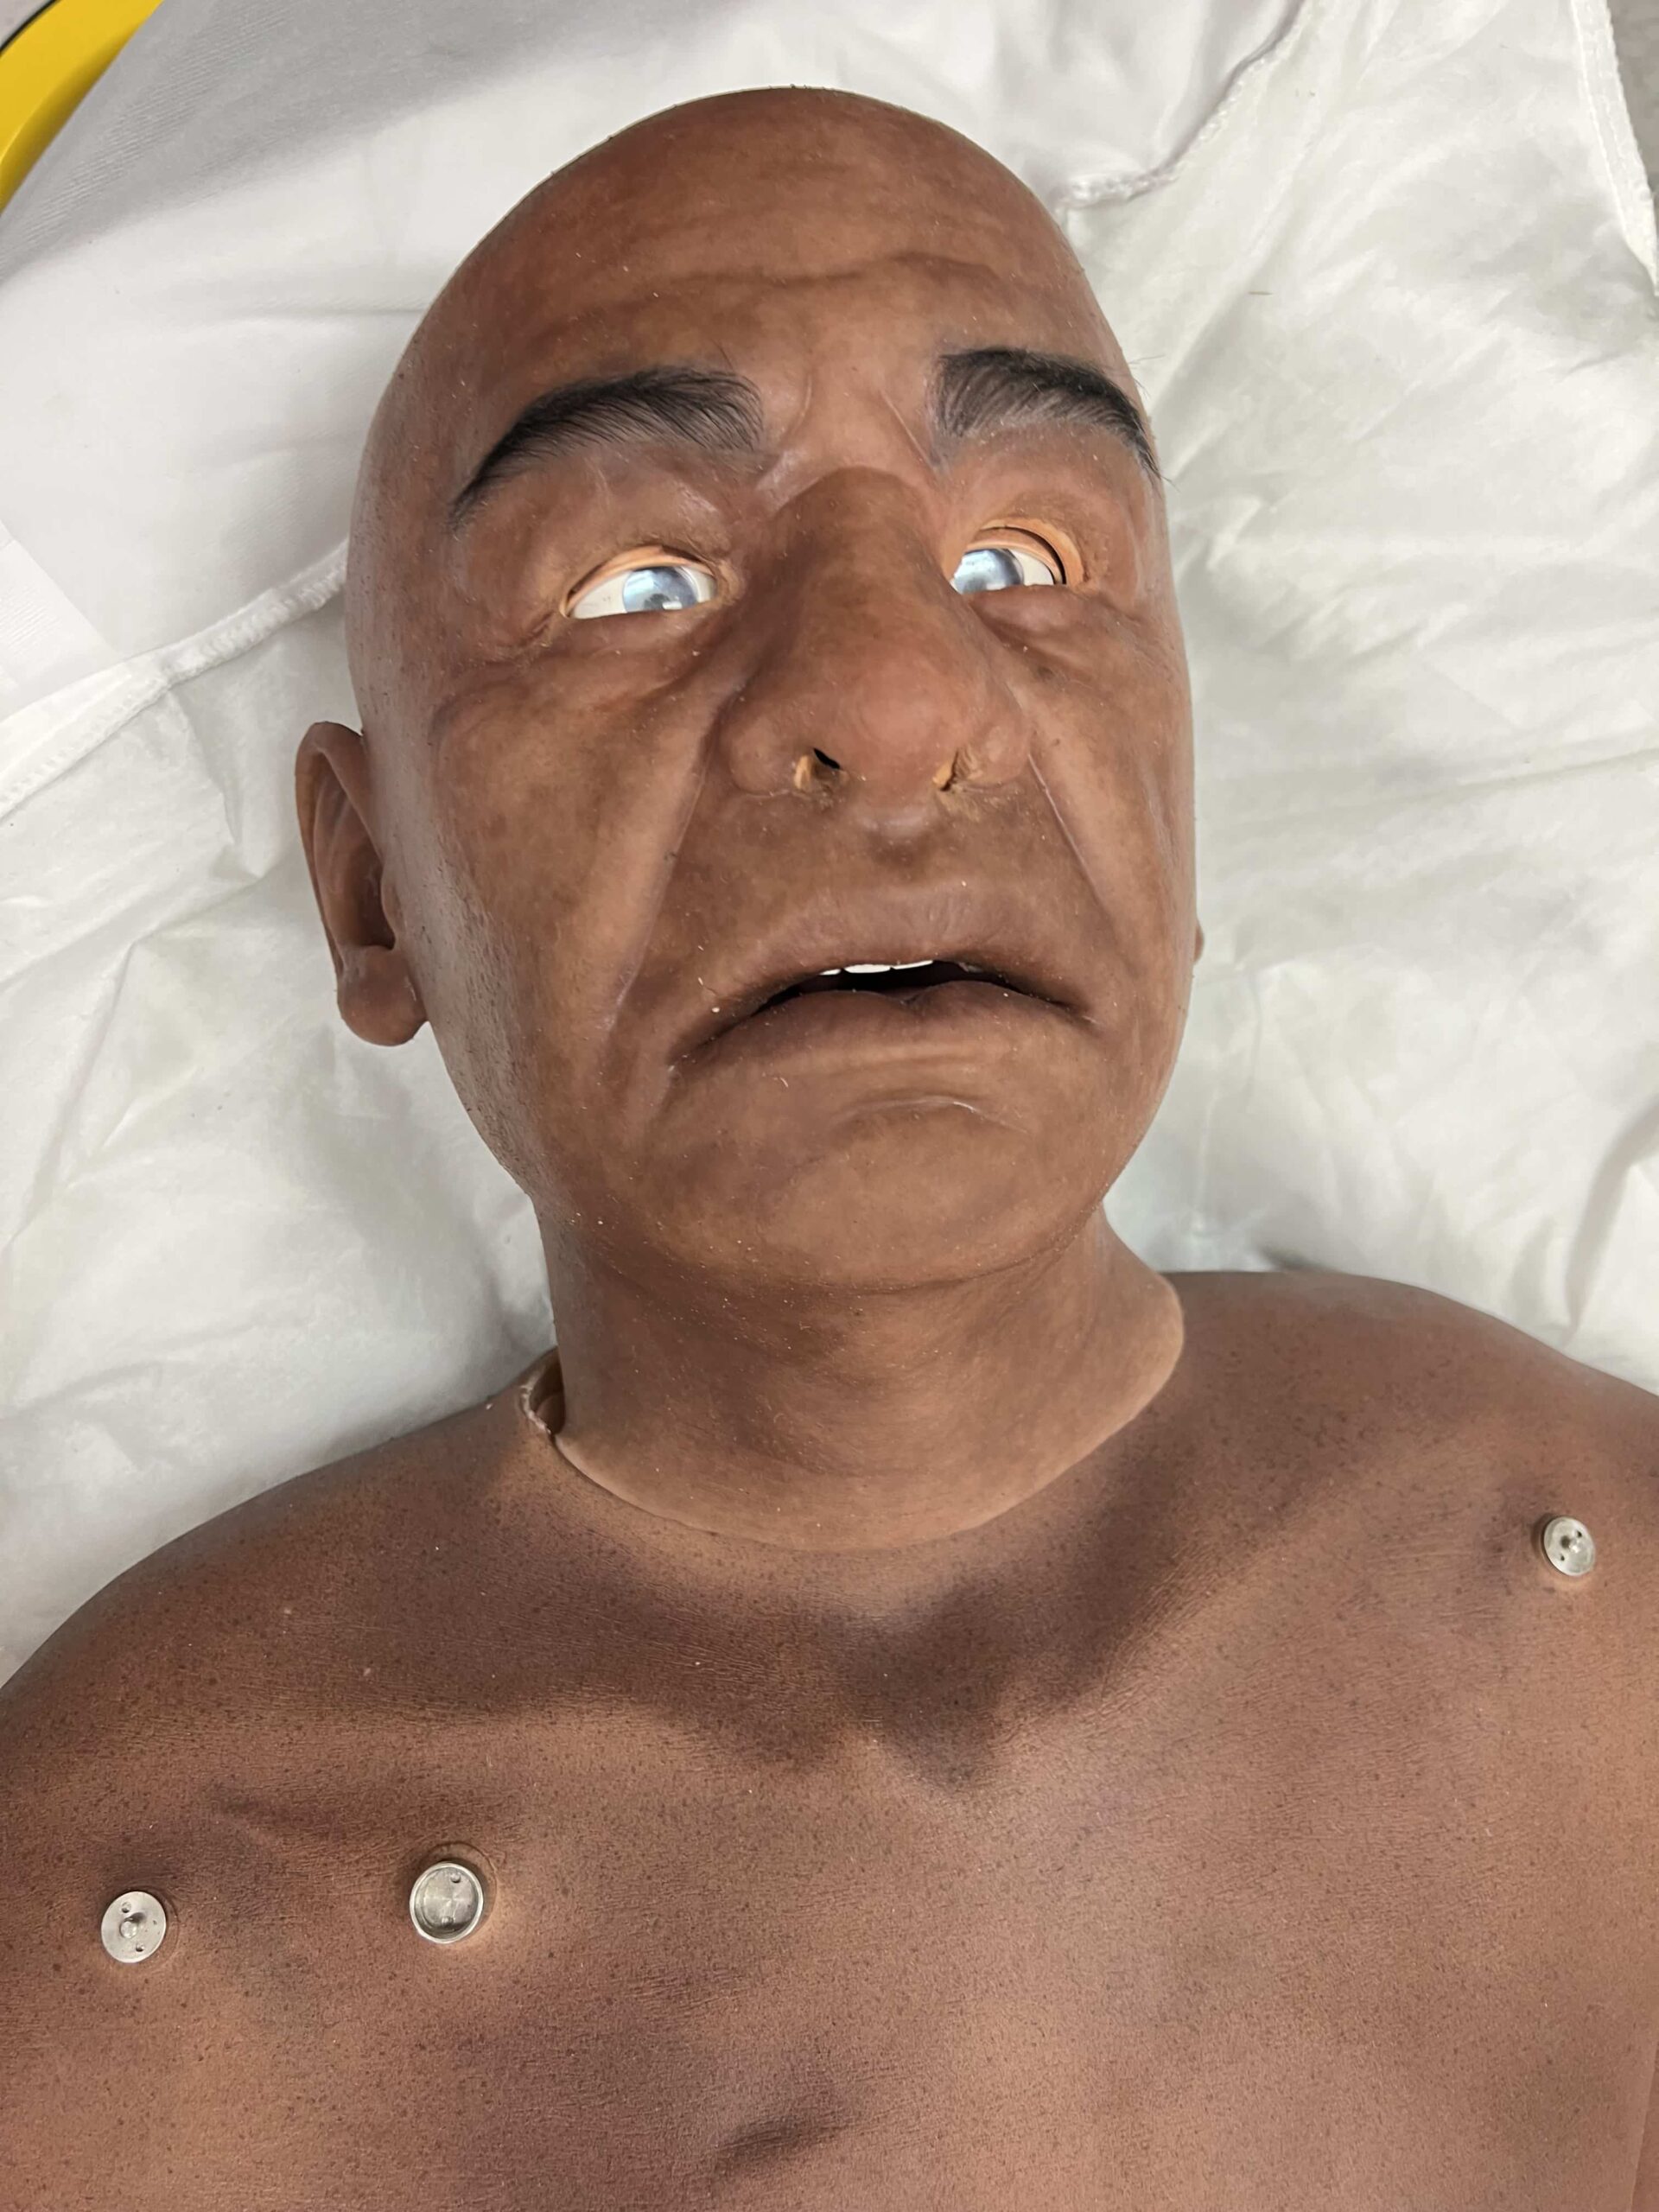 Echo Healthcare's highly realistic SecondSkin simulation product